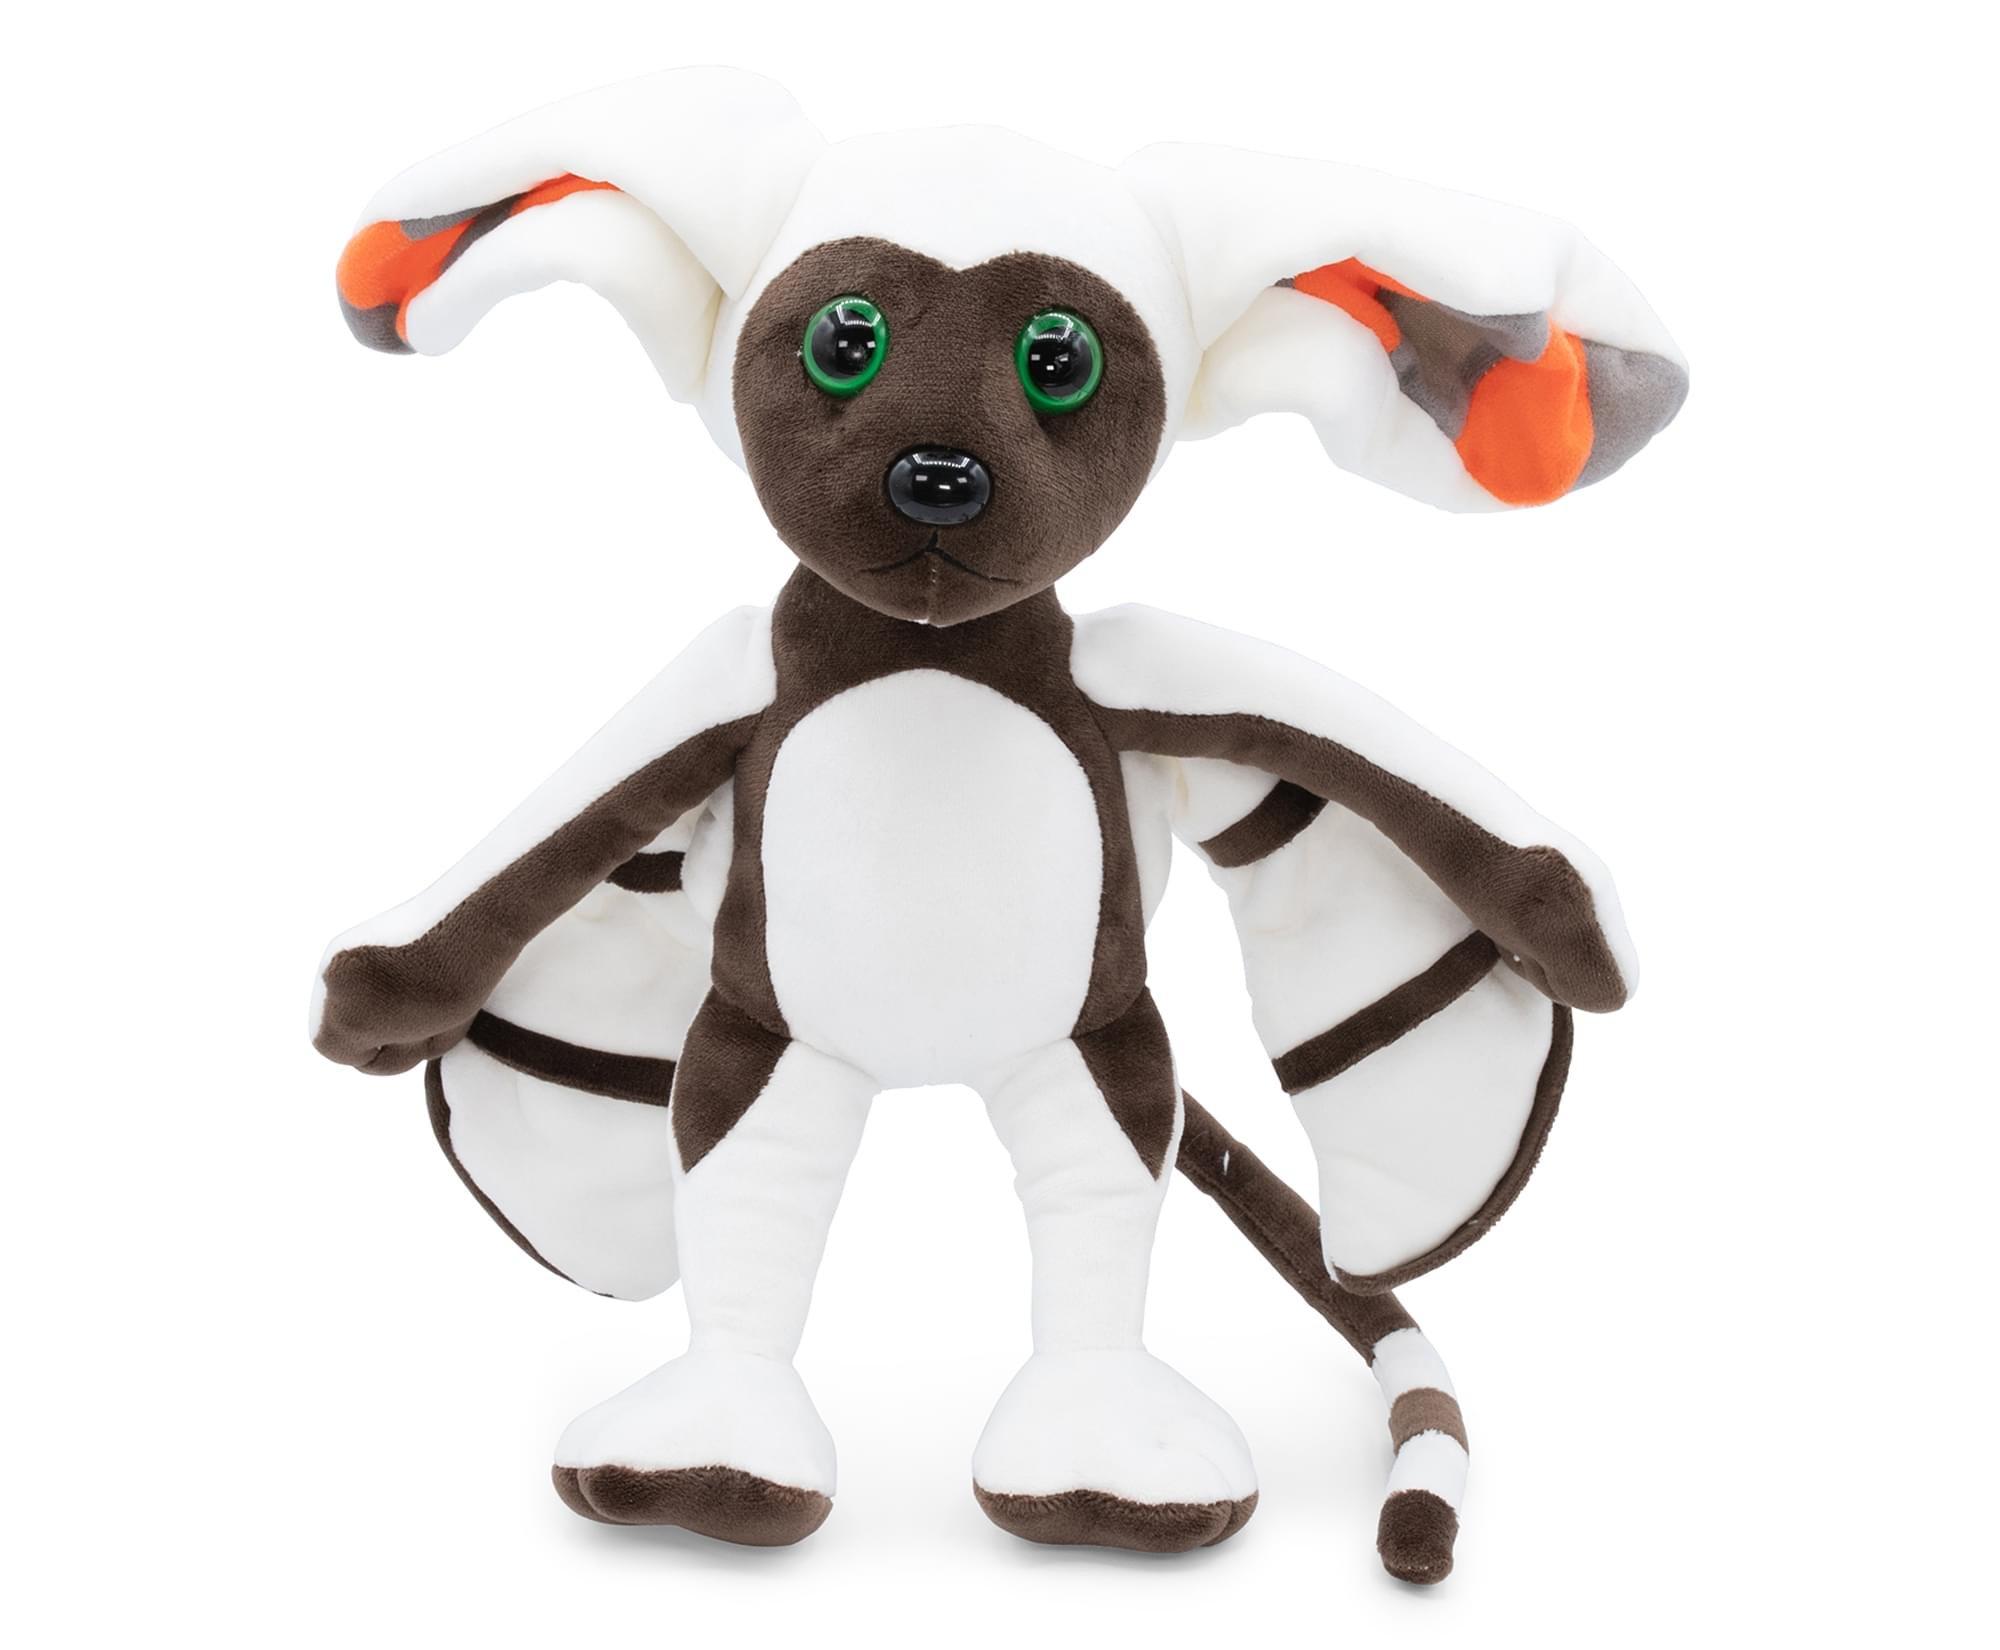 Avatar: The Last Airbender 13-in Momo Plush Toy